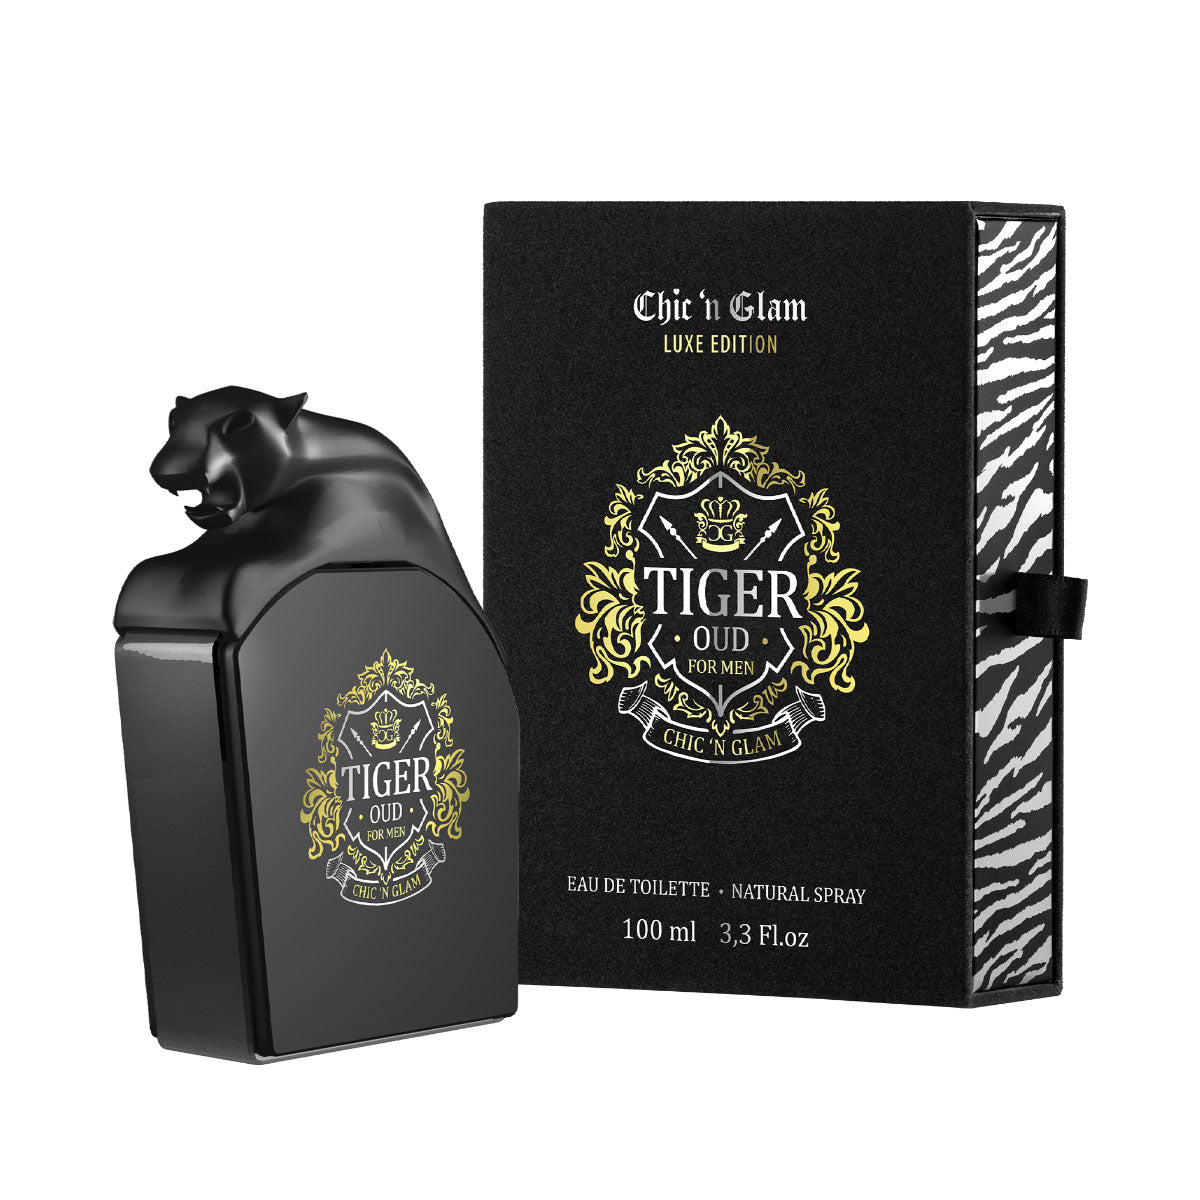 Chic'n Glam Lux Edition Tiger Oud